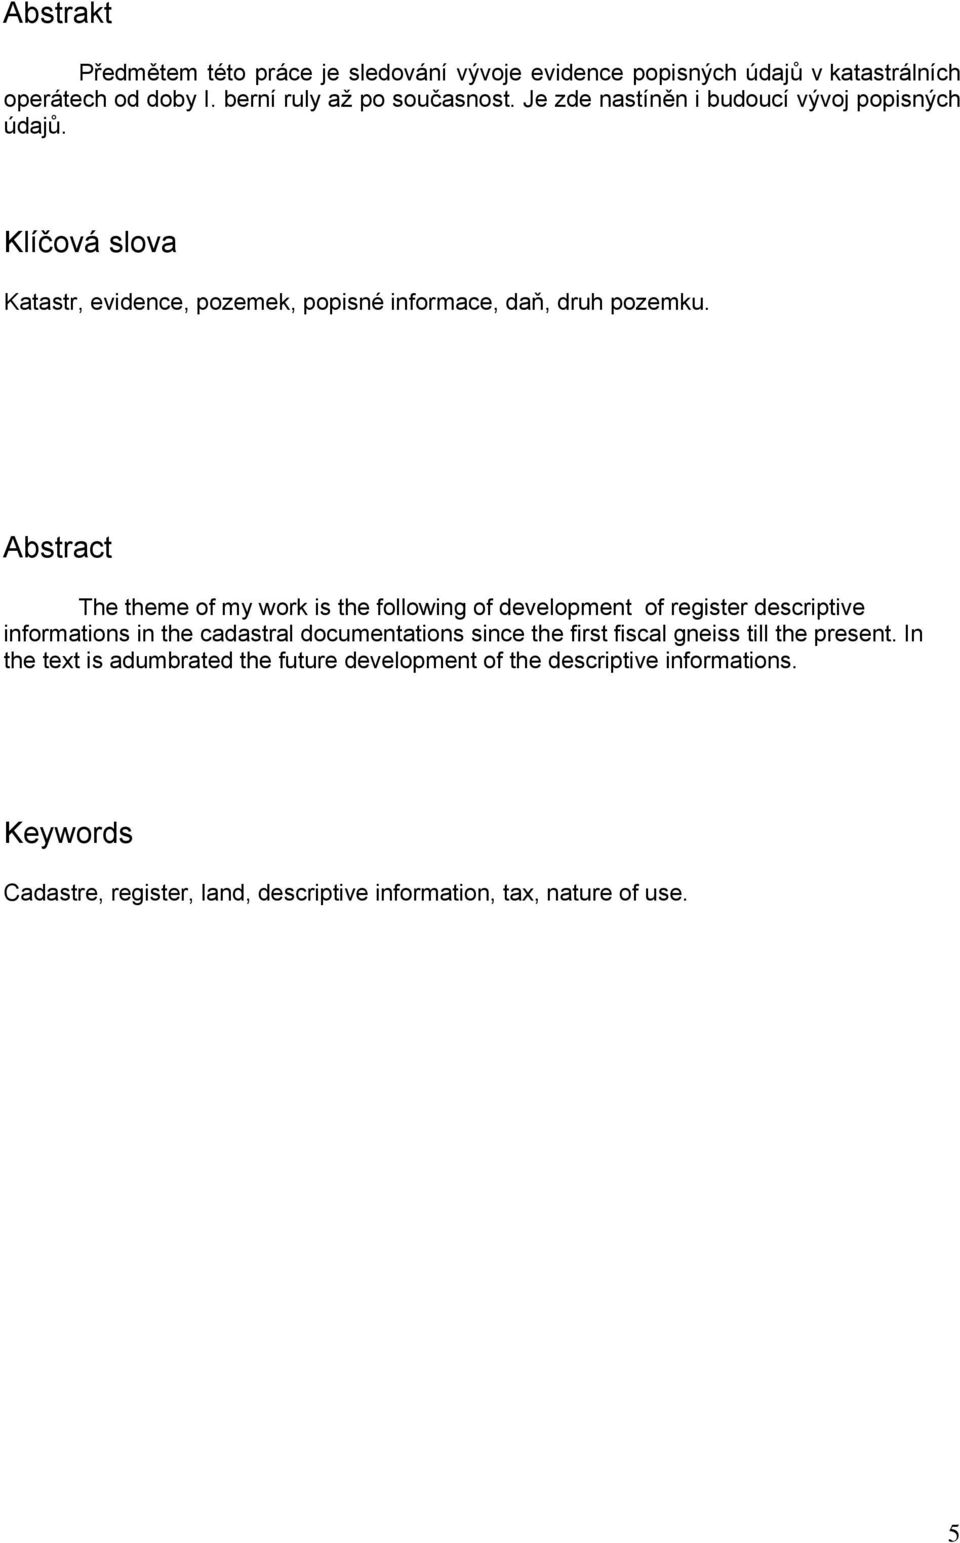 Abstract The theme of my work is the following of development of register descriptive informations in the cadastral documentations since the first